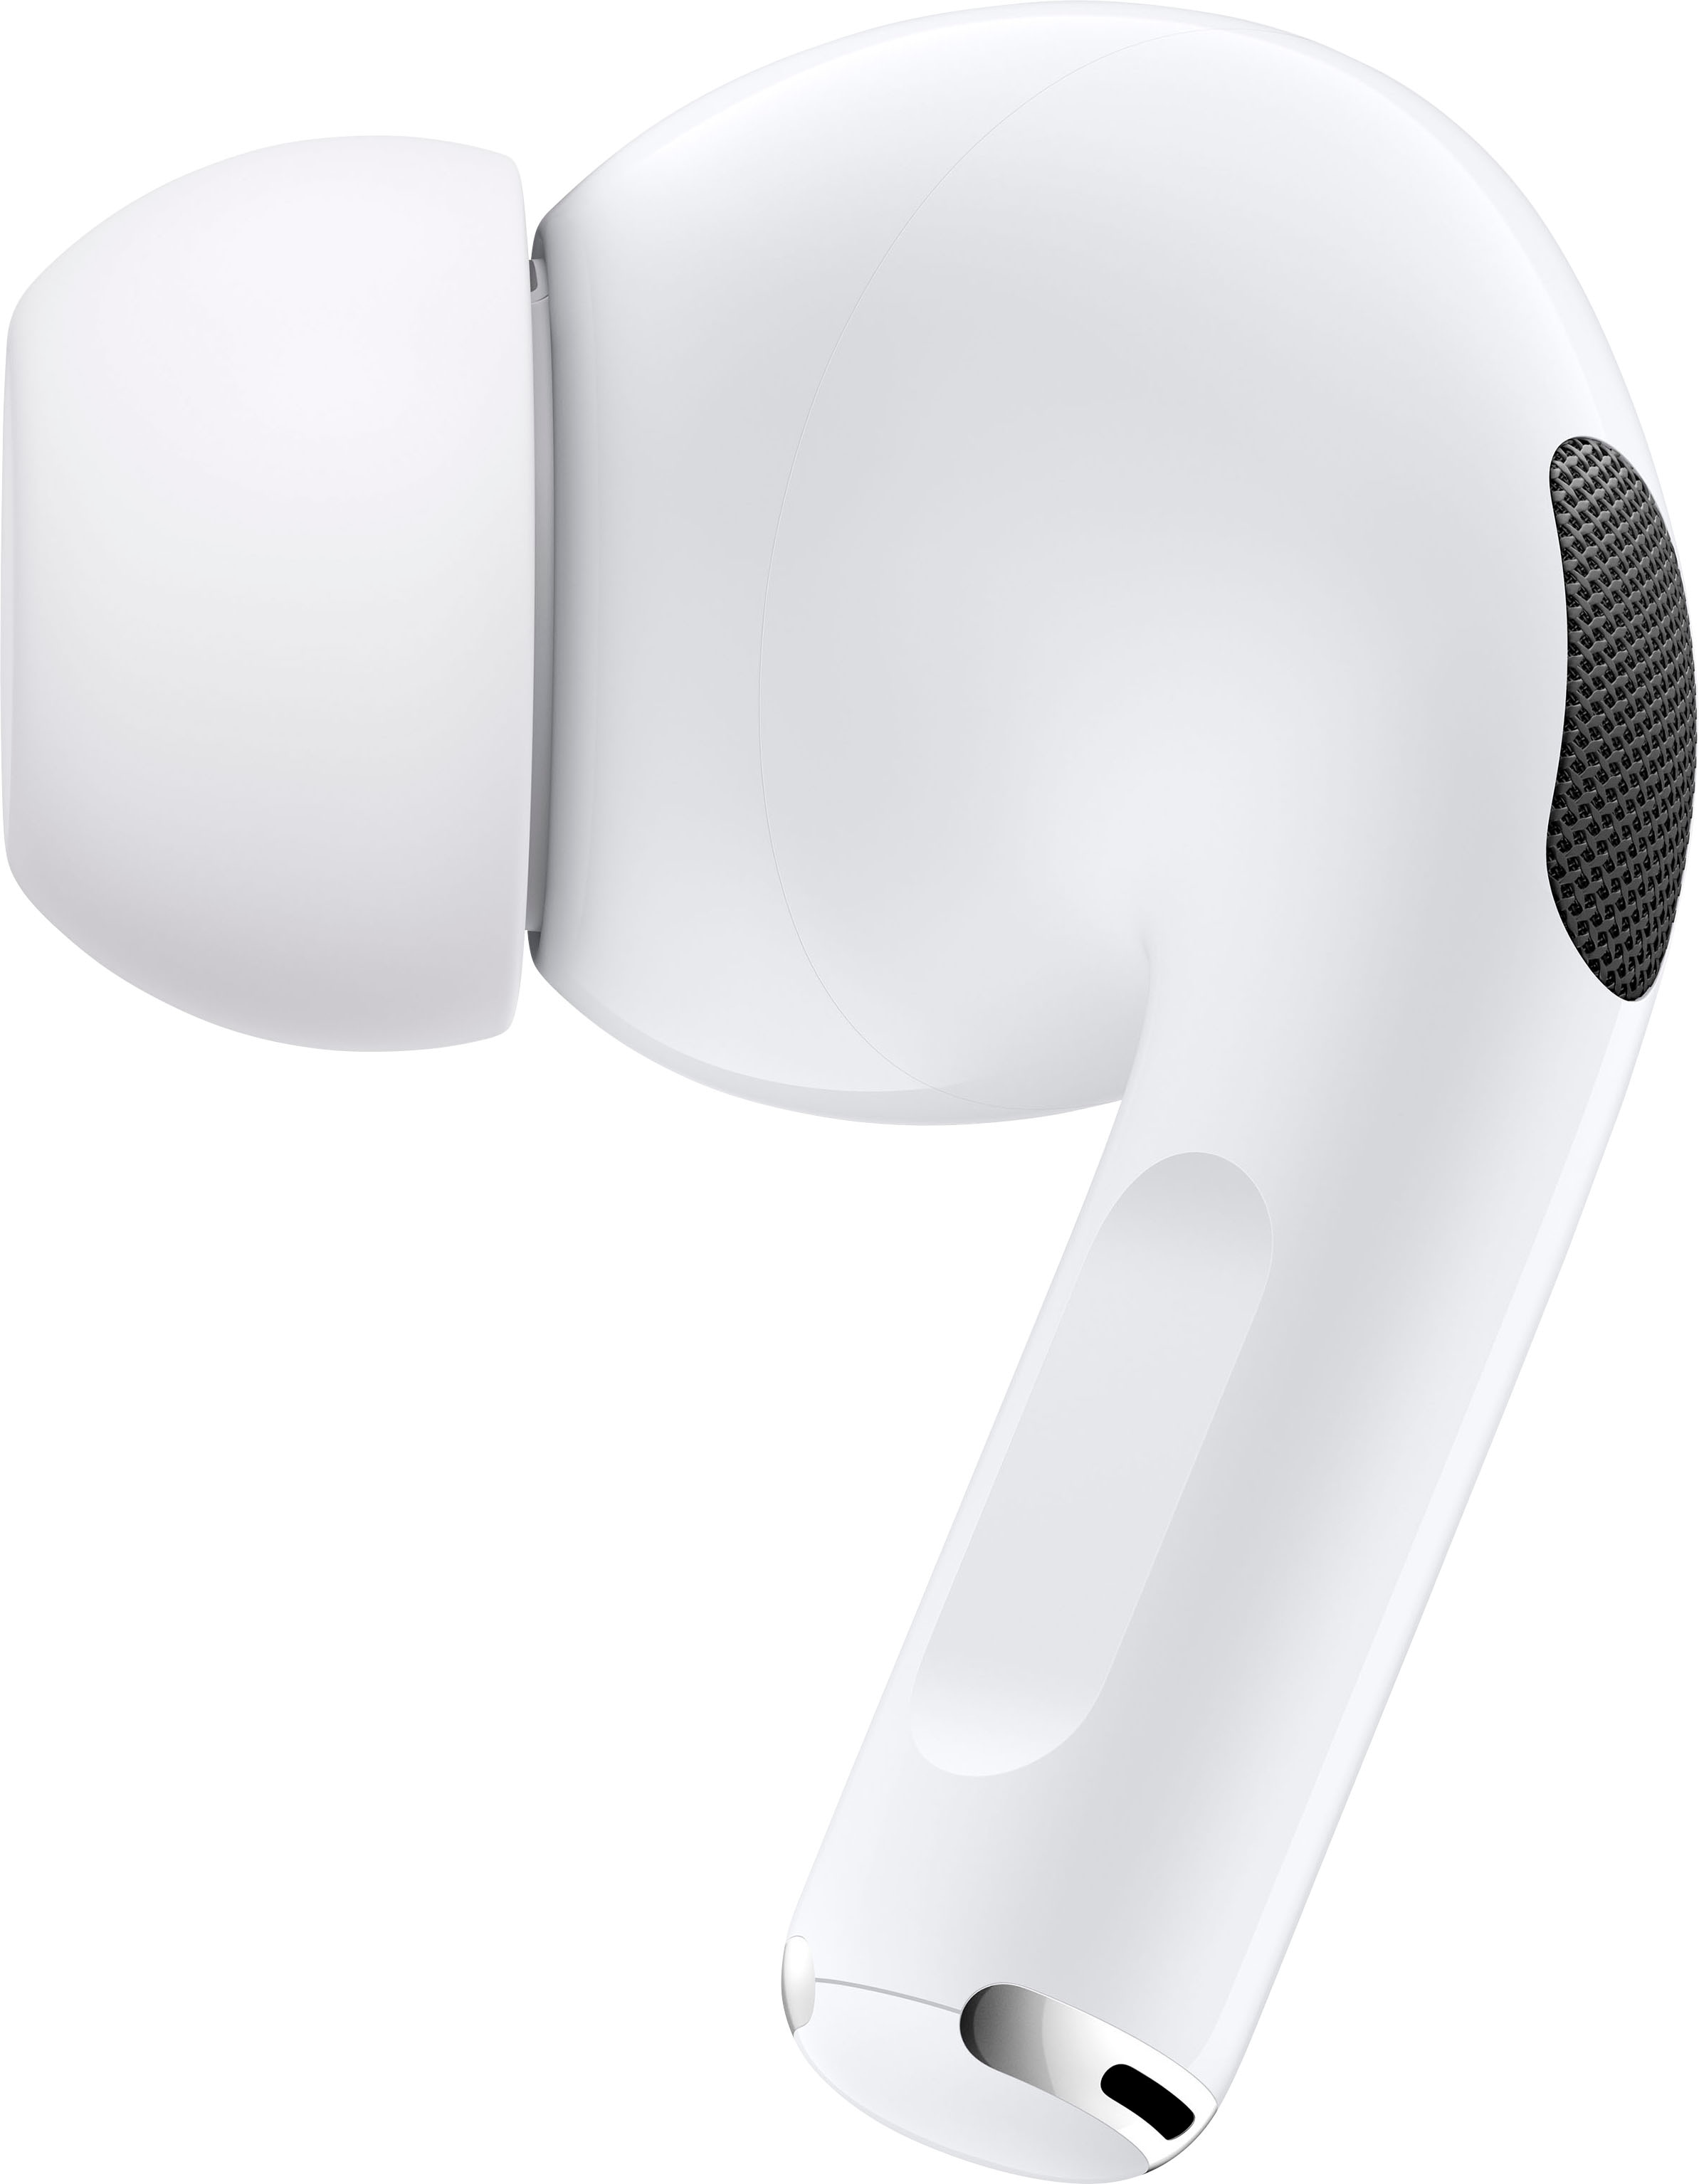 AirPods Pro ホワイト MWP22ZM/A-connectedremag.com